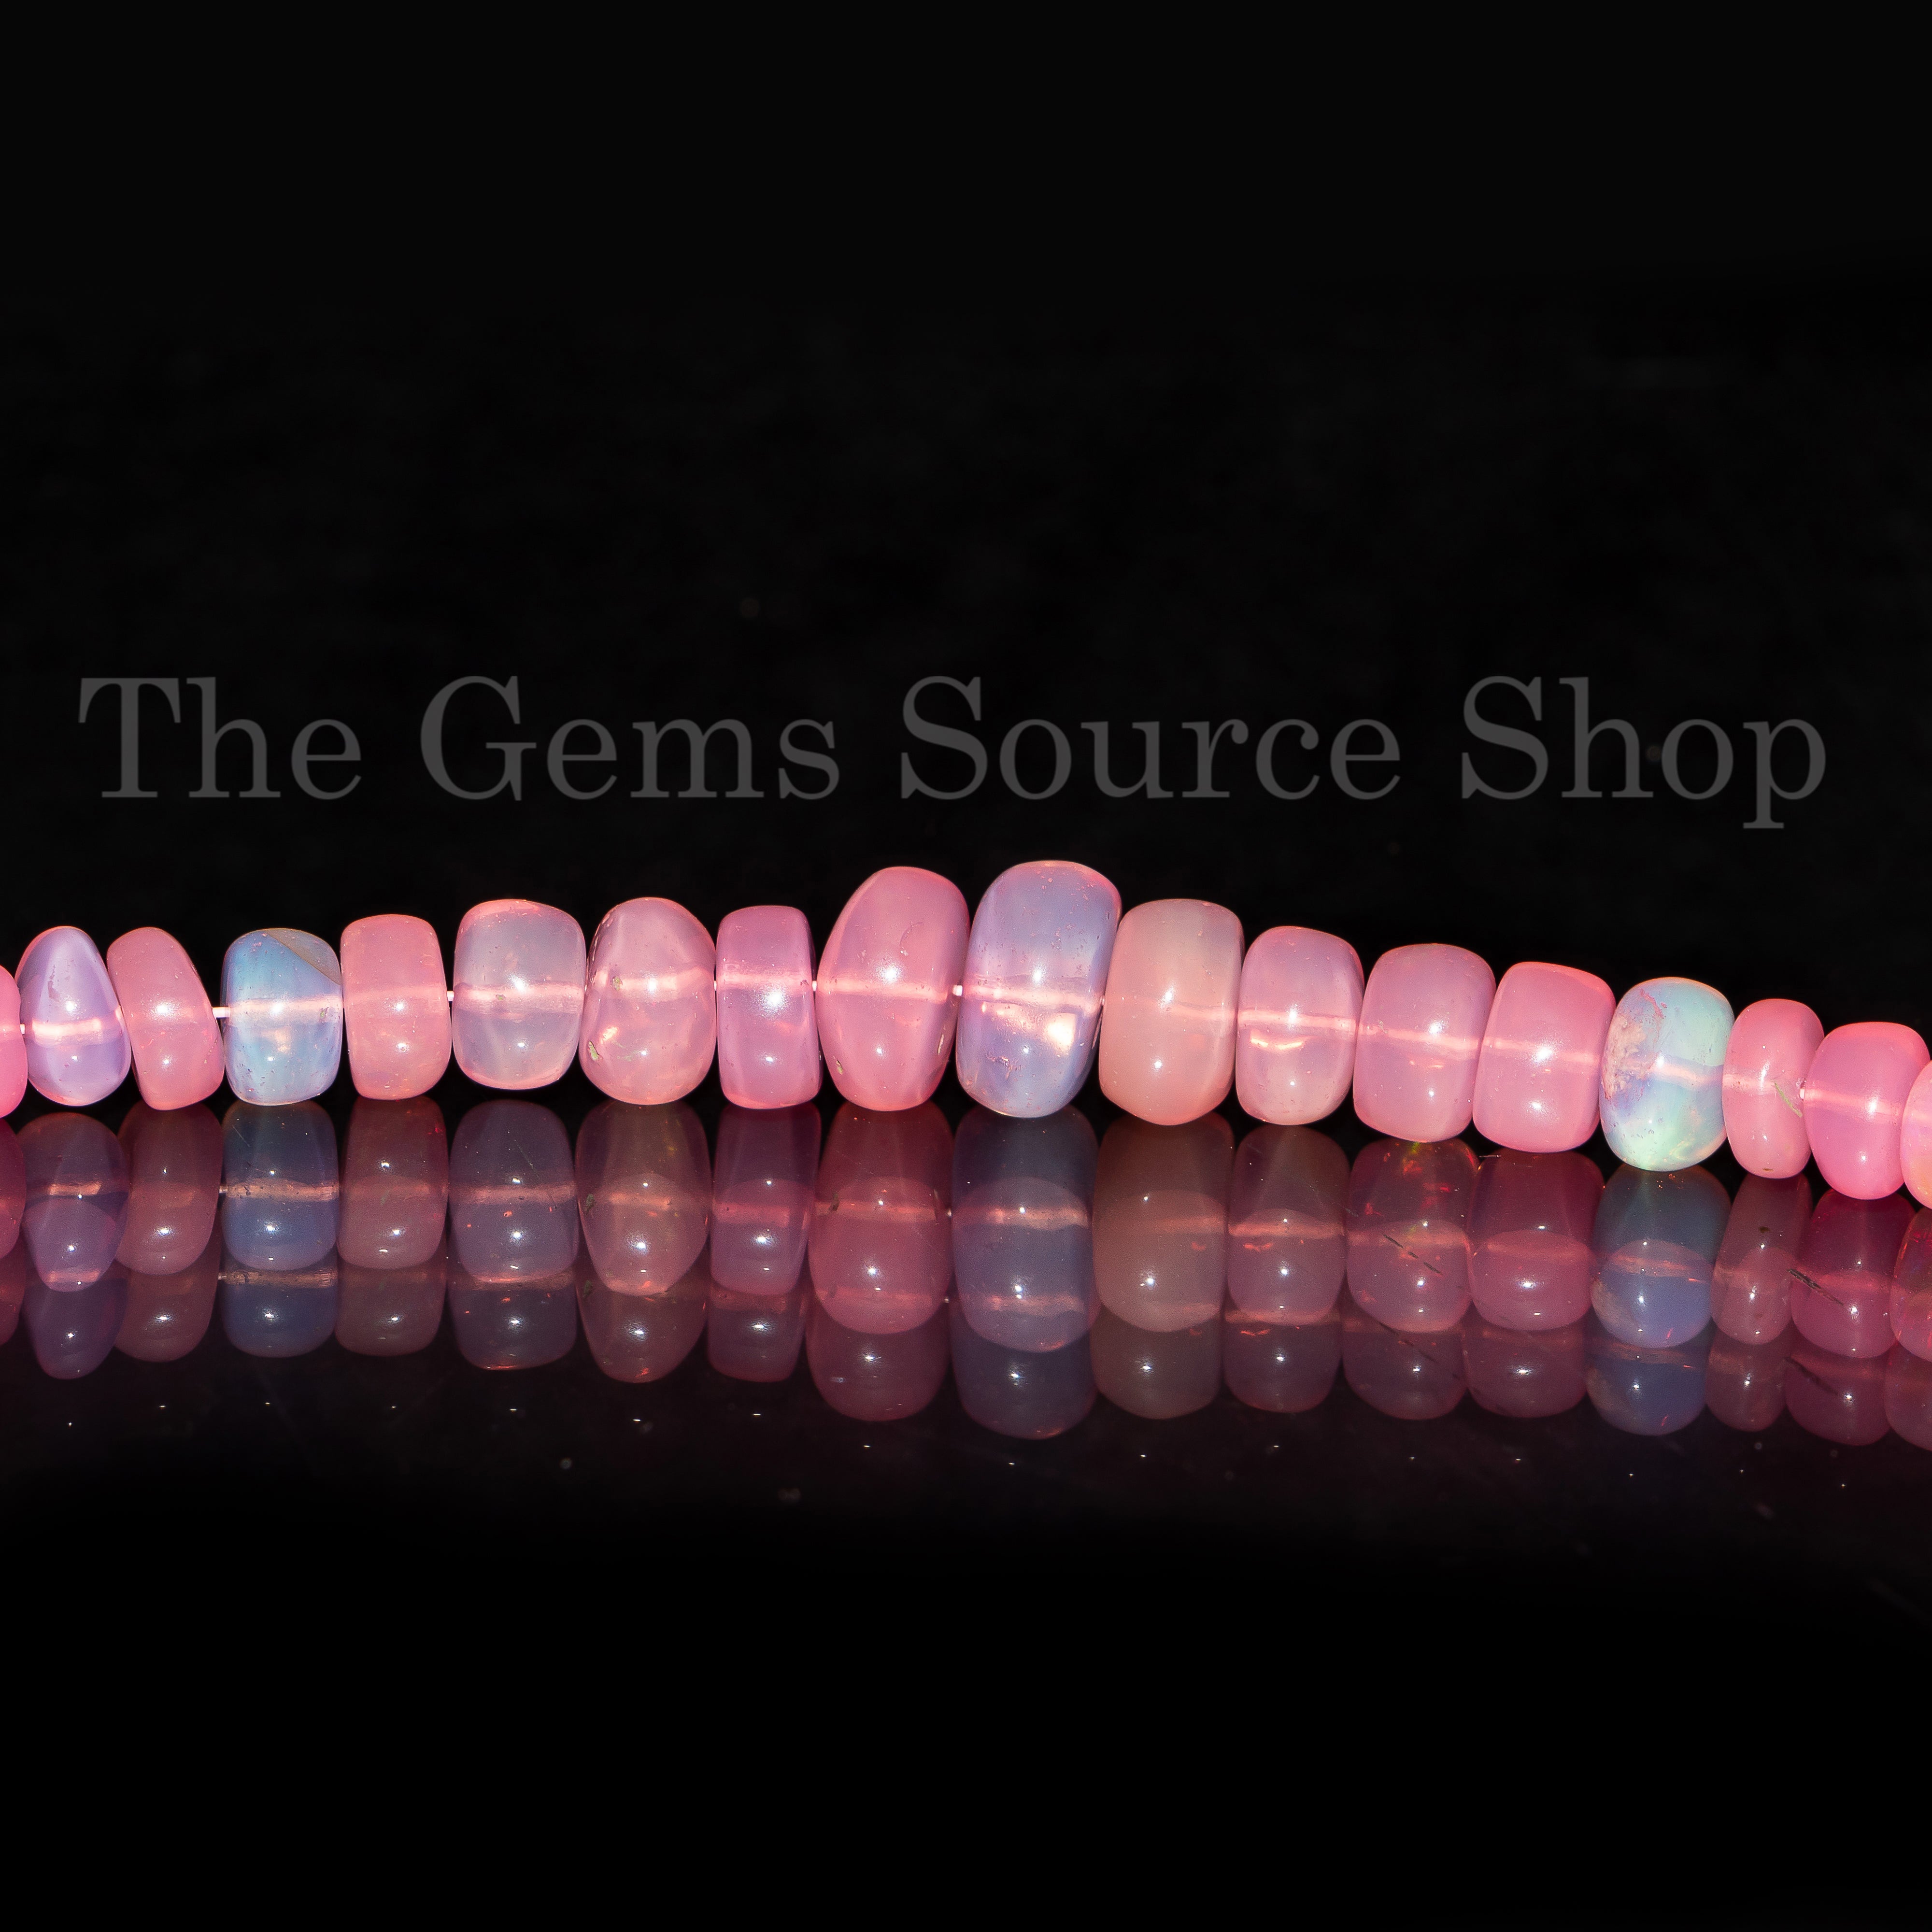 Pink Ethiopian Opal Gemstone Beads, Opal Smooth Rondelle Beads